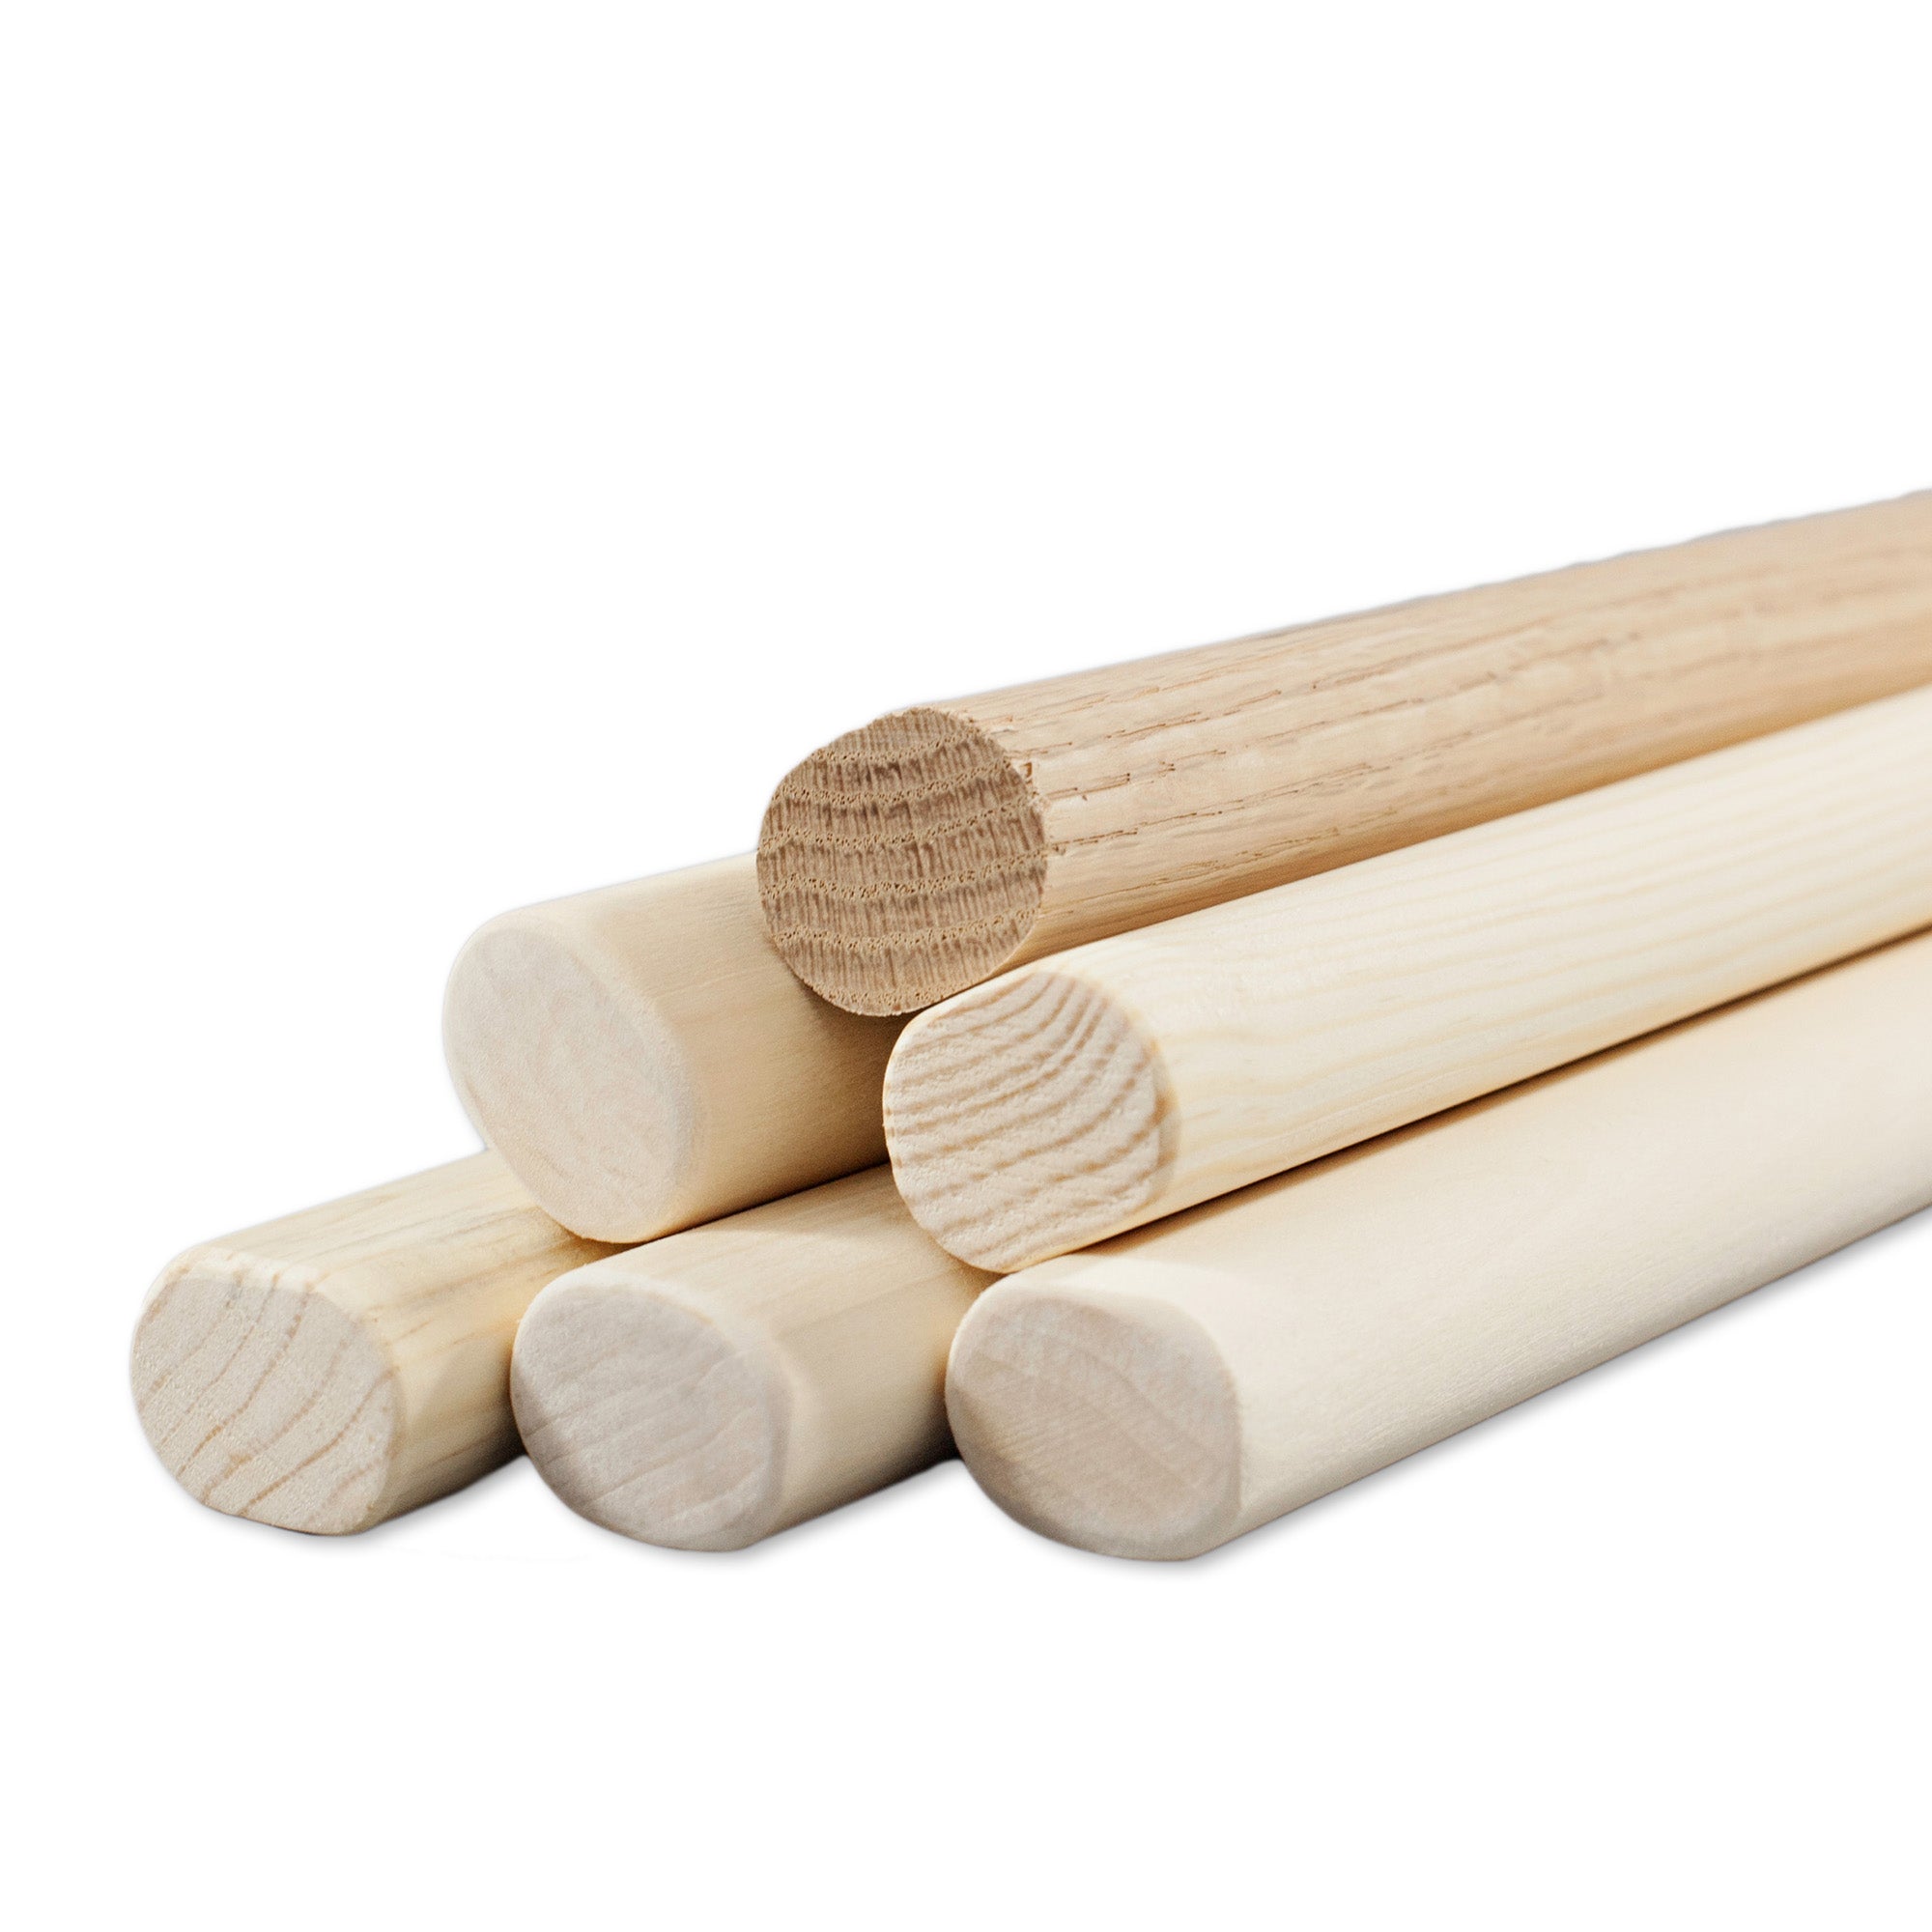 Wooden Dowel Rods - UPHOLSTERY